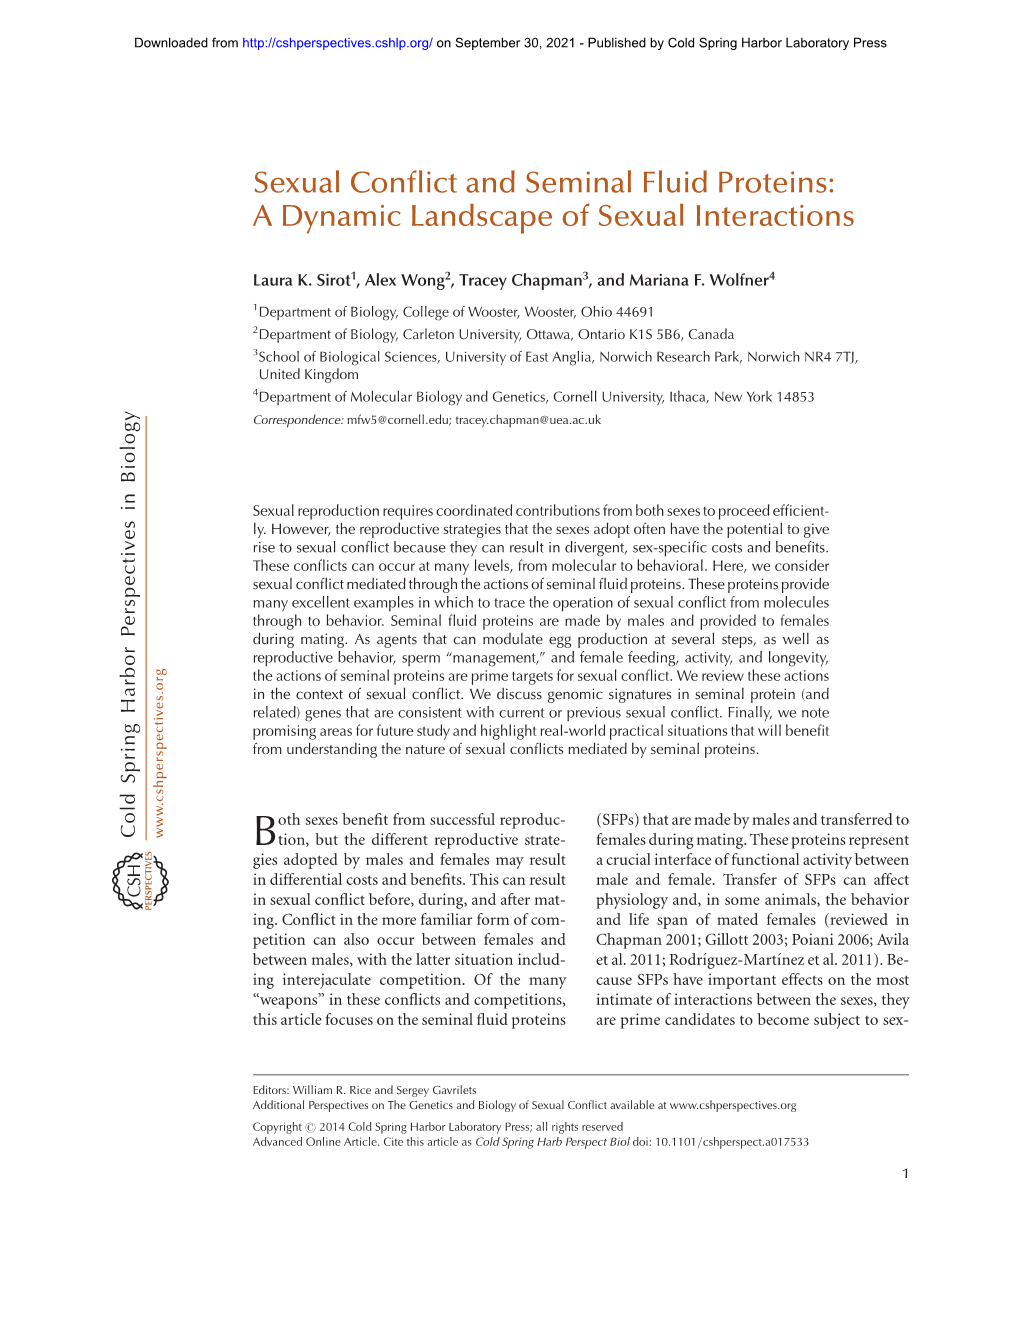 Sexual Conflict and Seminal Fluid Proteins: a Dynamic Landscape of Sexual Interactions